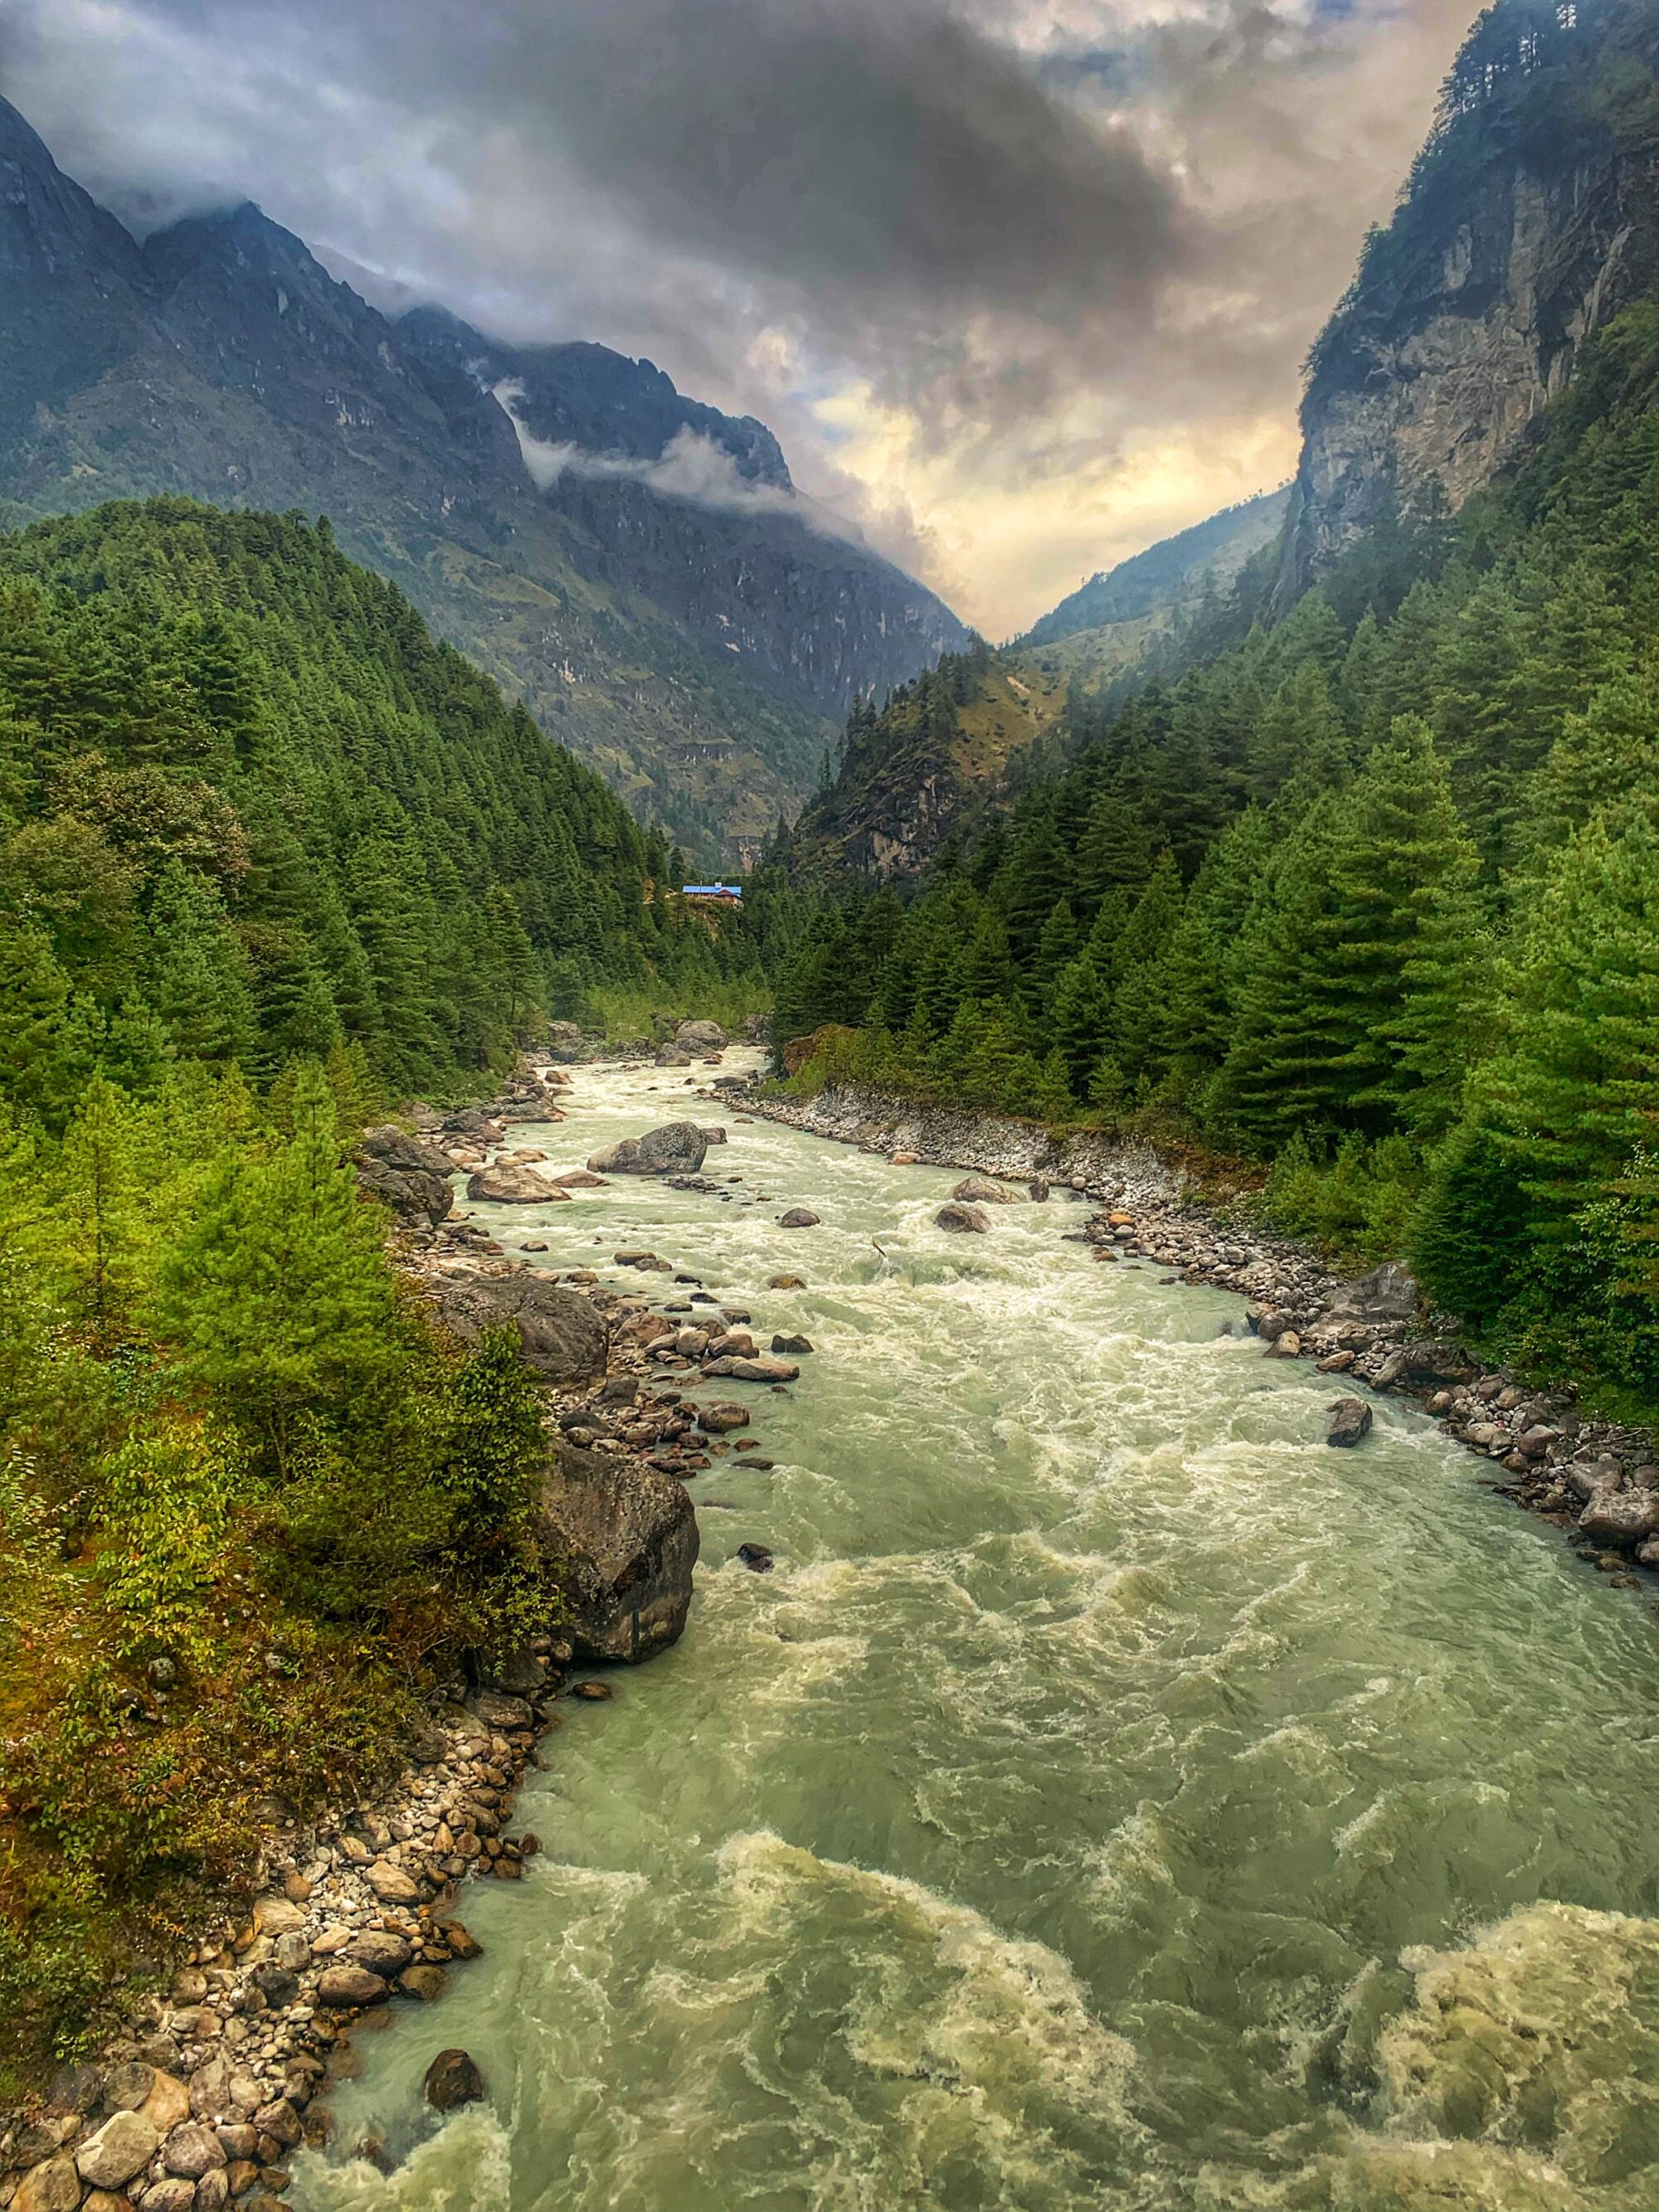 A river carves through a heavily tree-covered mountain valley, carrying glacial melt downstream.